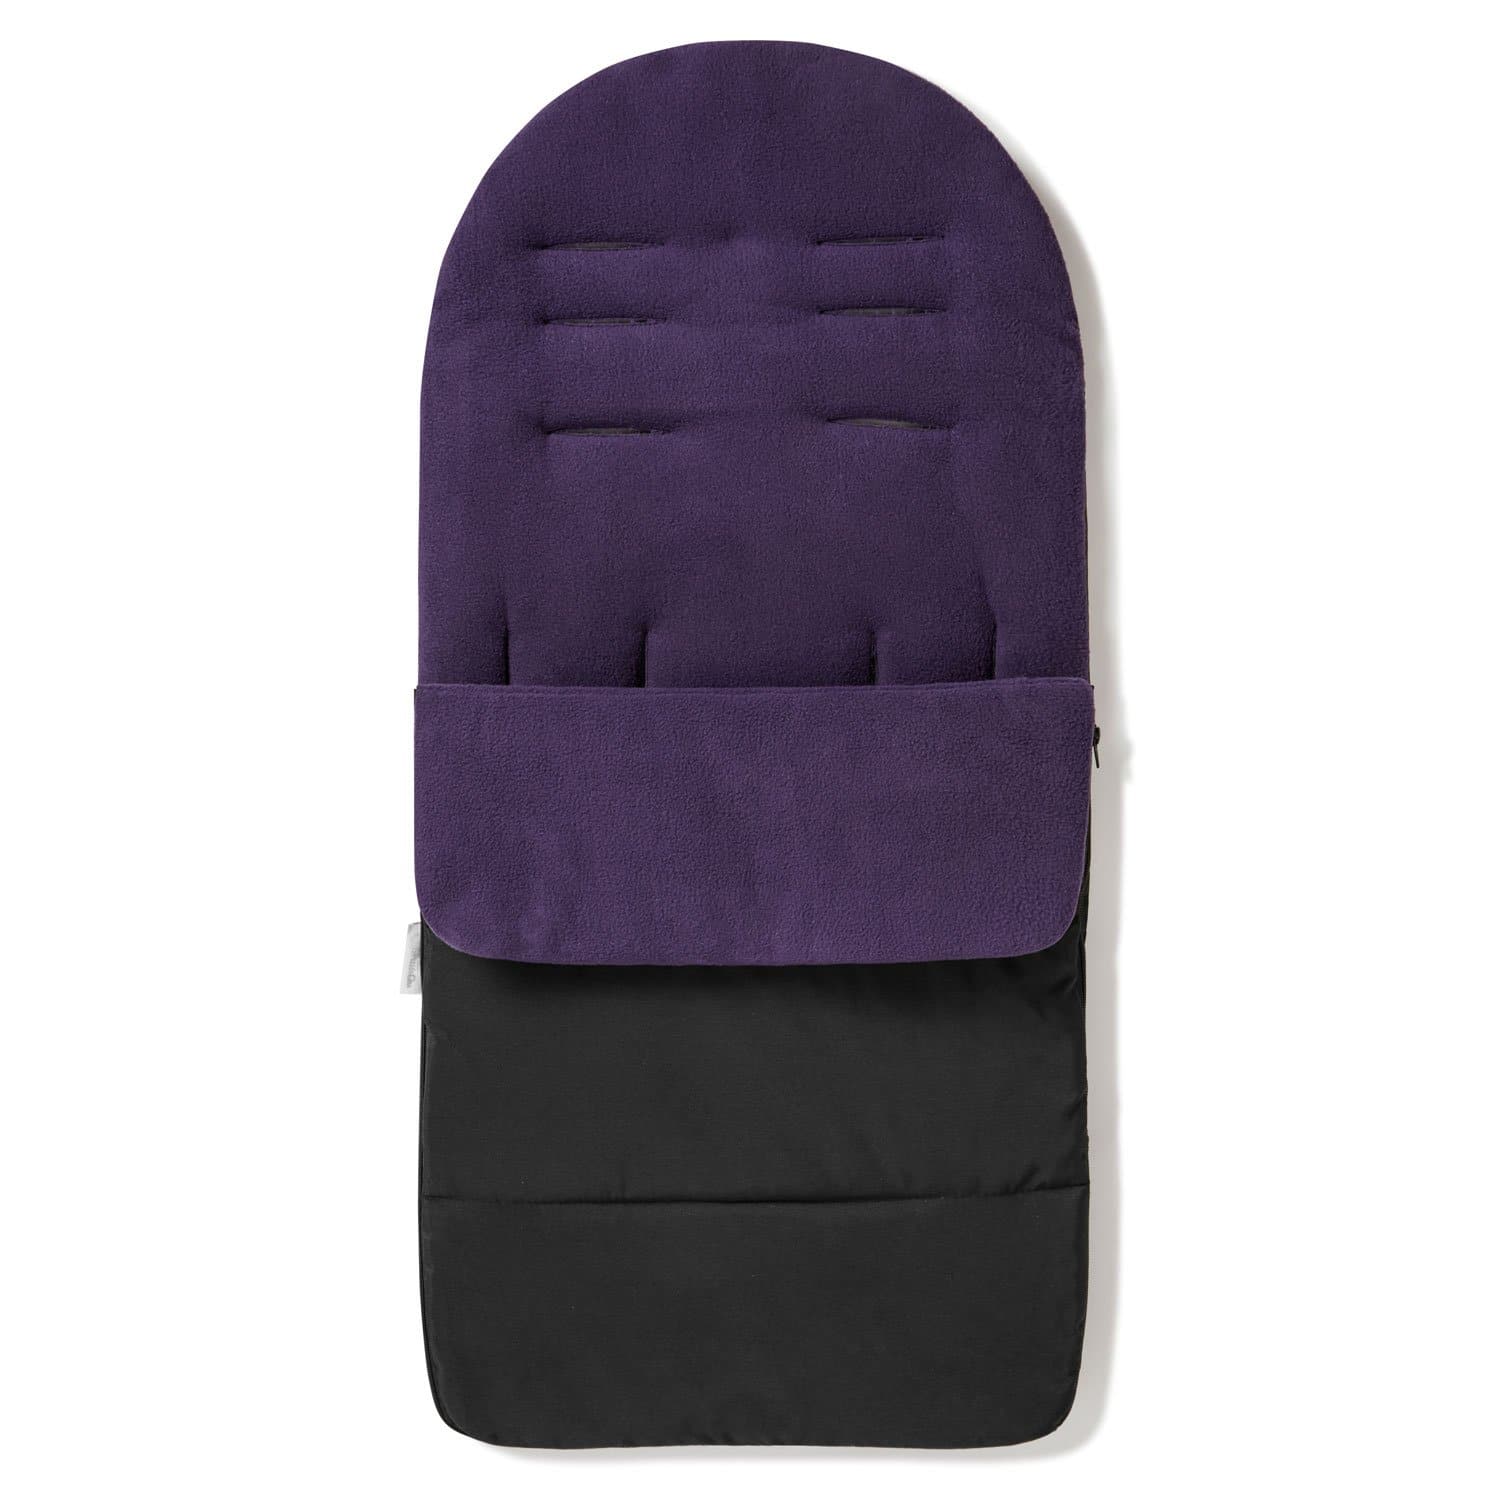 Premium Footmuff / Cosy Toes Compatible with Bumbleride - Plum Purple / Fits All Models | For Your Little One